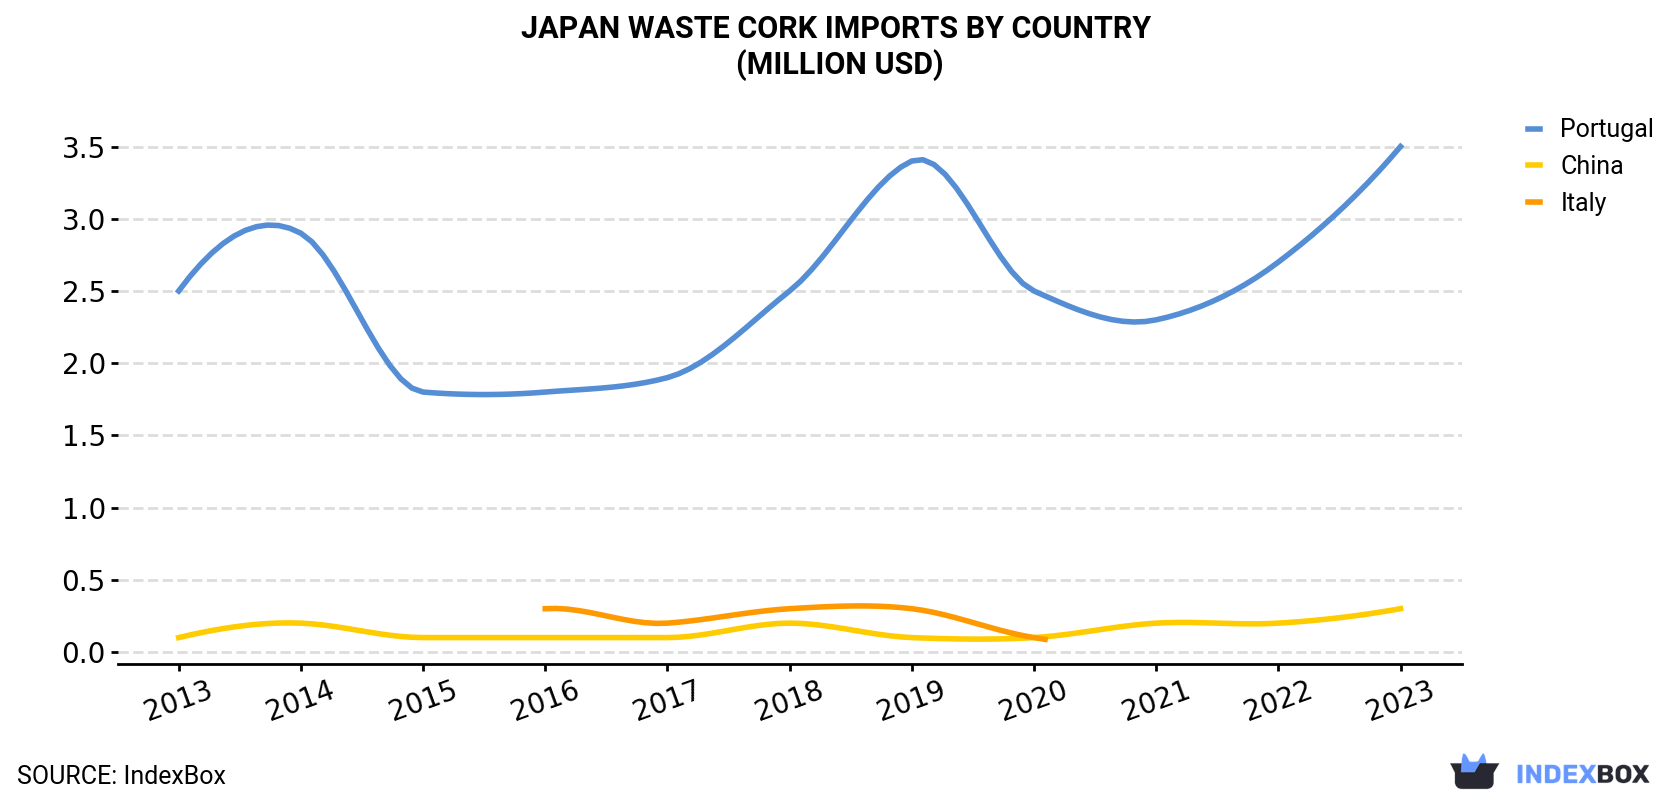 Japan Waste Cork Imports By Country (Million USD)